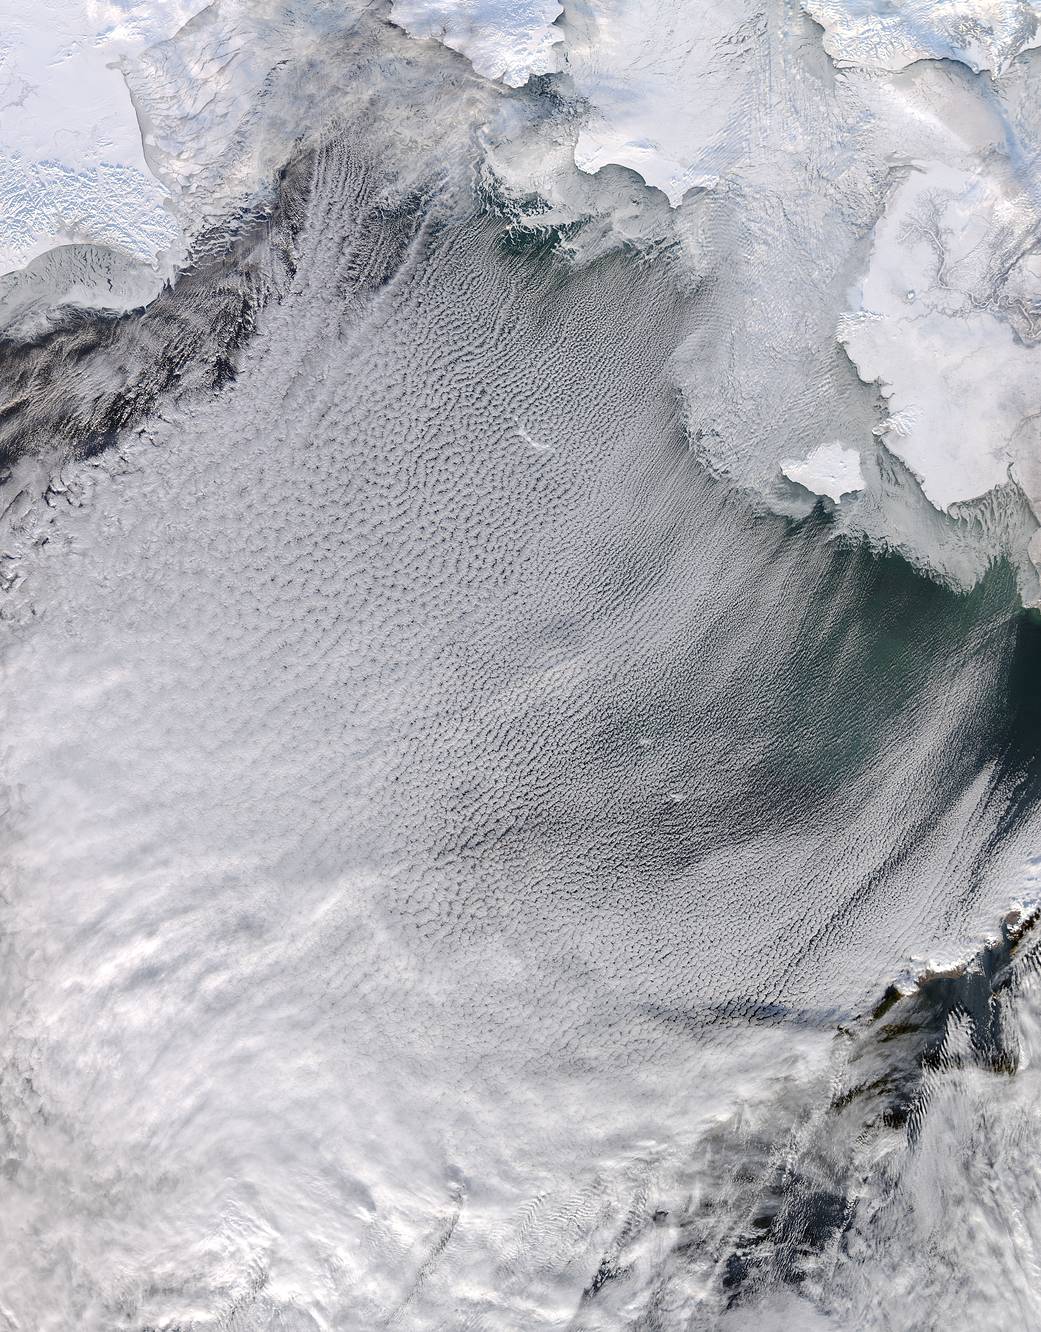 Ice, wind, cold temperatures and ocean waters combined to created dramatic cloud formations over the Bering Sea in late January,